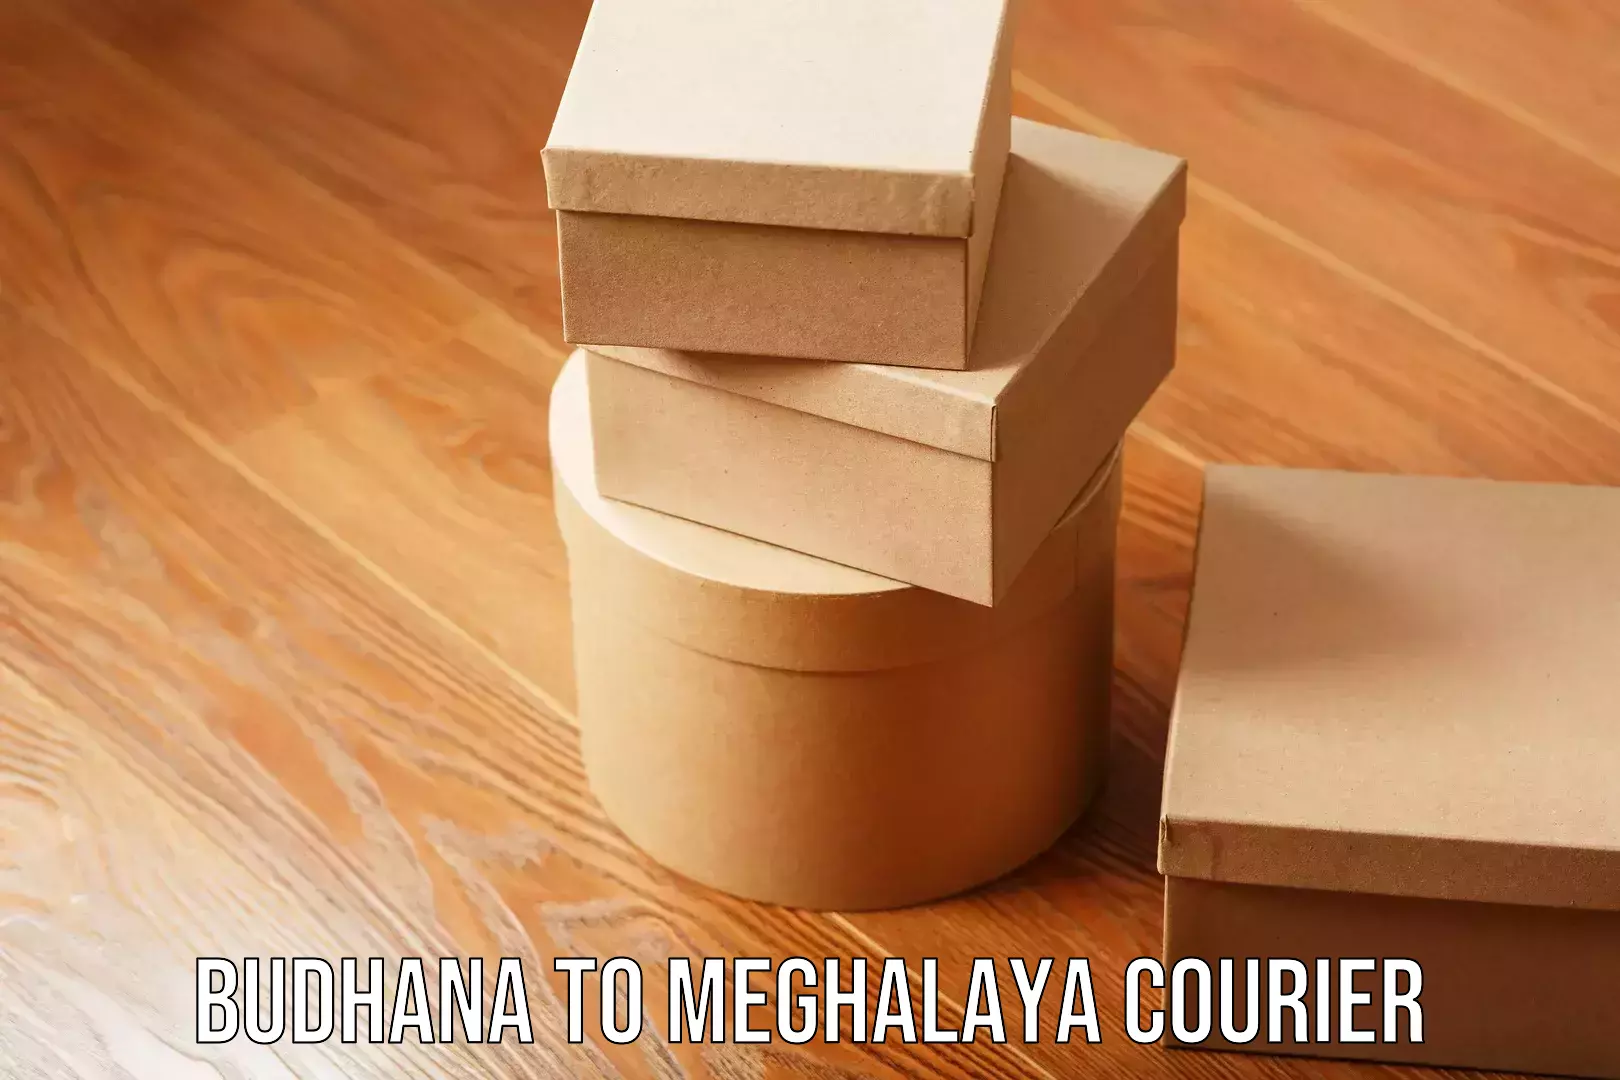 Personal parcel delivery in Budhana to Meghalaya